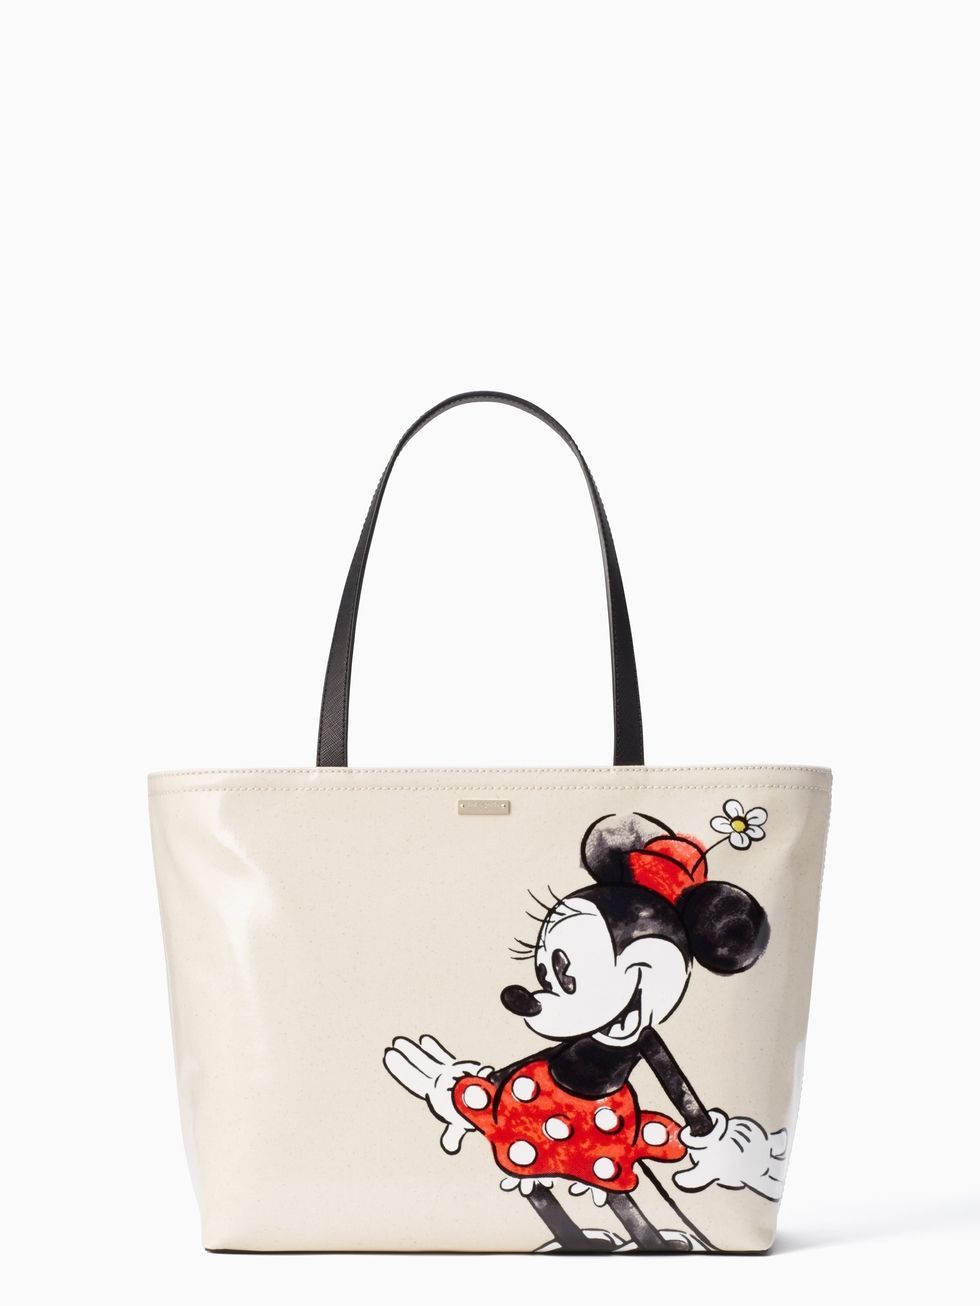 NEW Disney x Kate Spade Collection Available Today at Disney Springs -  Inside the Magic